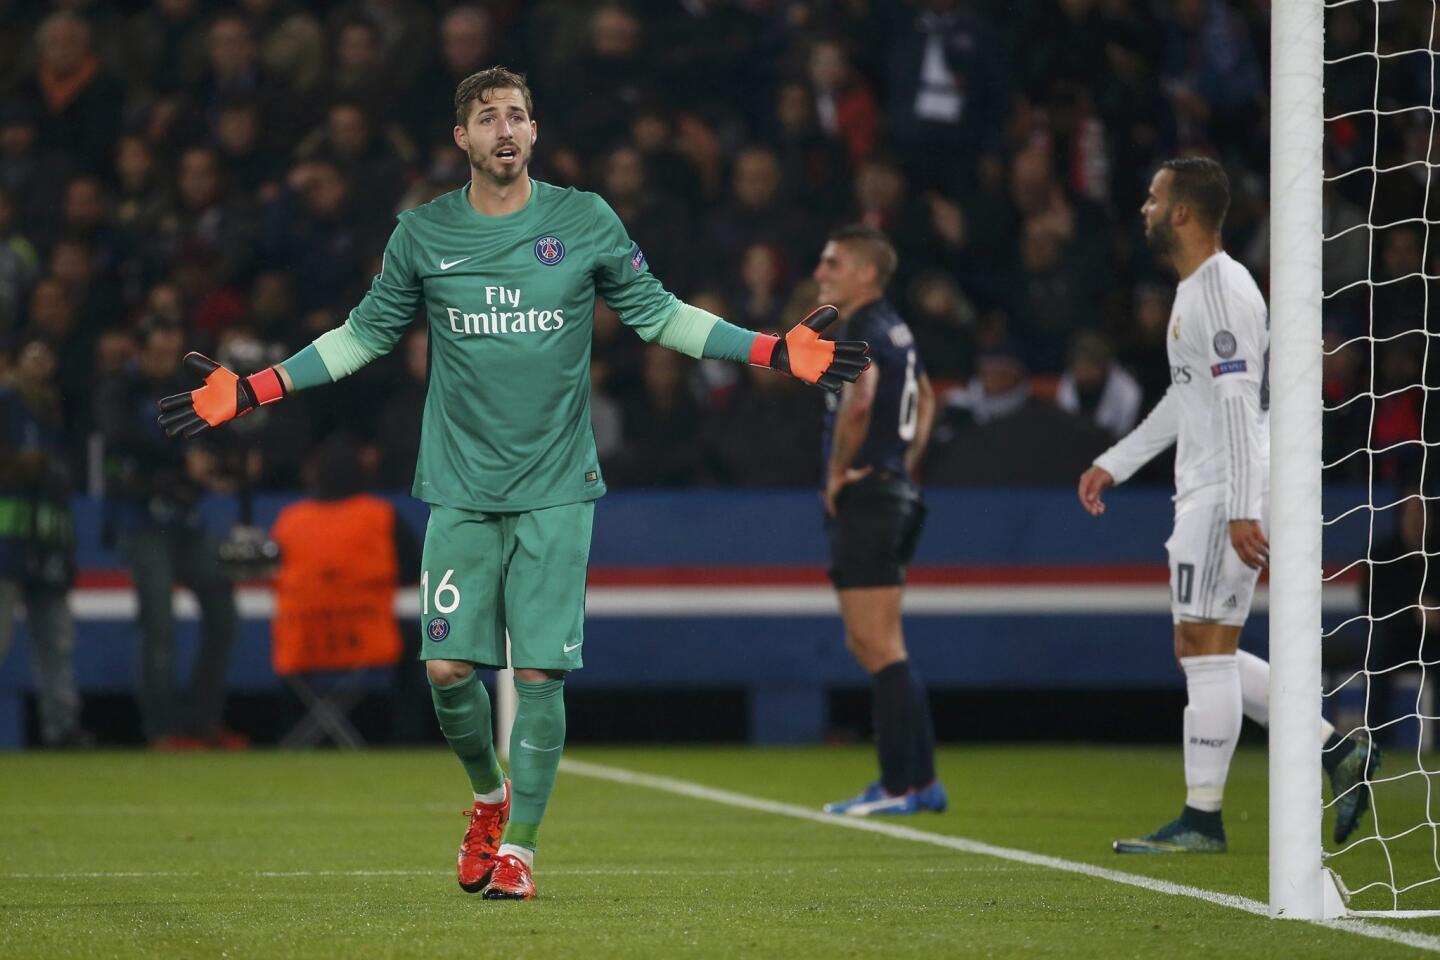 Paris Saint Germain's goalkeeper Kevin Trapp reacts during their Champions League Group A soccer match against Real Madrin at the Parc des Princes stadium in Paris